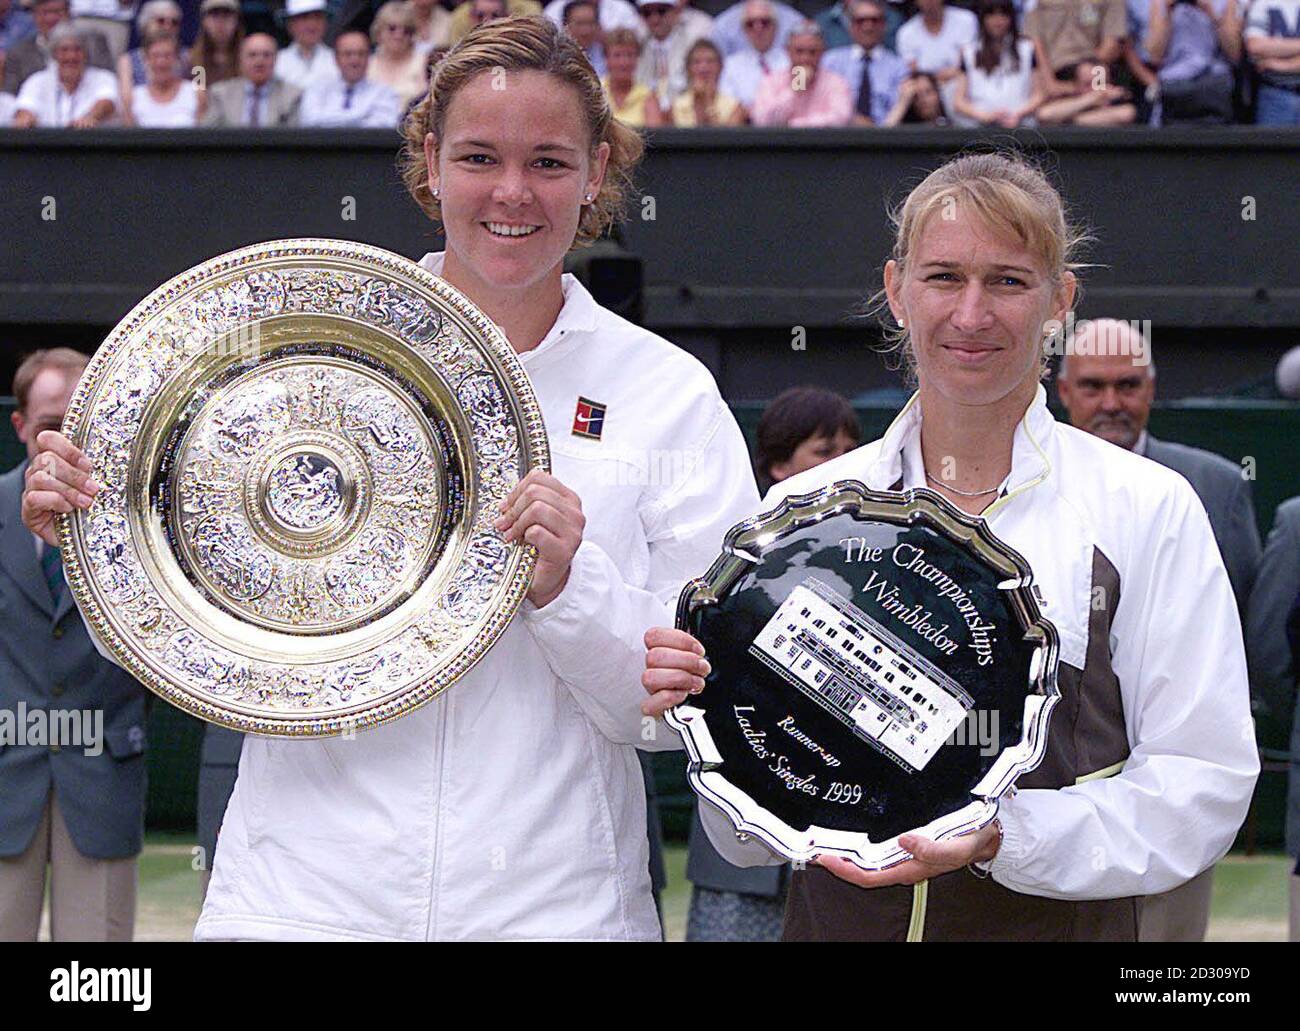 No Commercial Use : Ladies' Singles winner Lindsay Davenport (left) and  runner up Steffi Graf pose for photographgers at Wimbledon. Davenport  defeated Germany's Steffi Graf 6-4 7-5. 13/7/99: Graf confirms she will